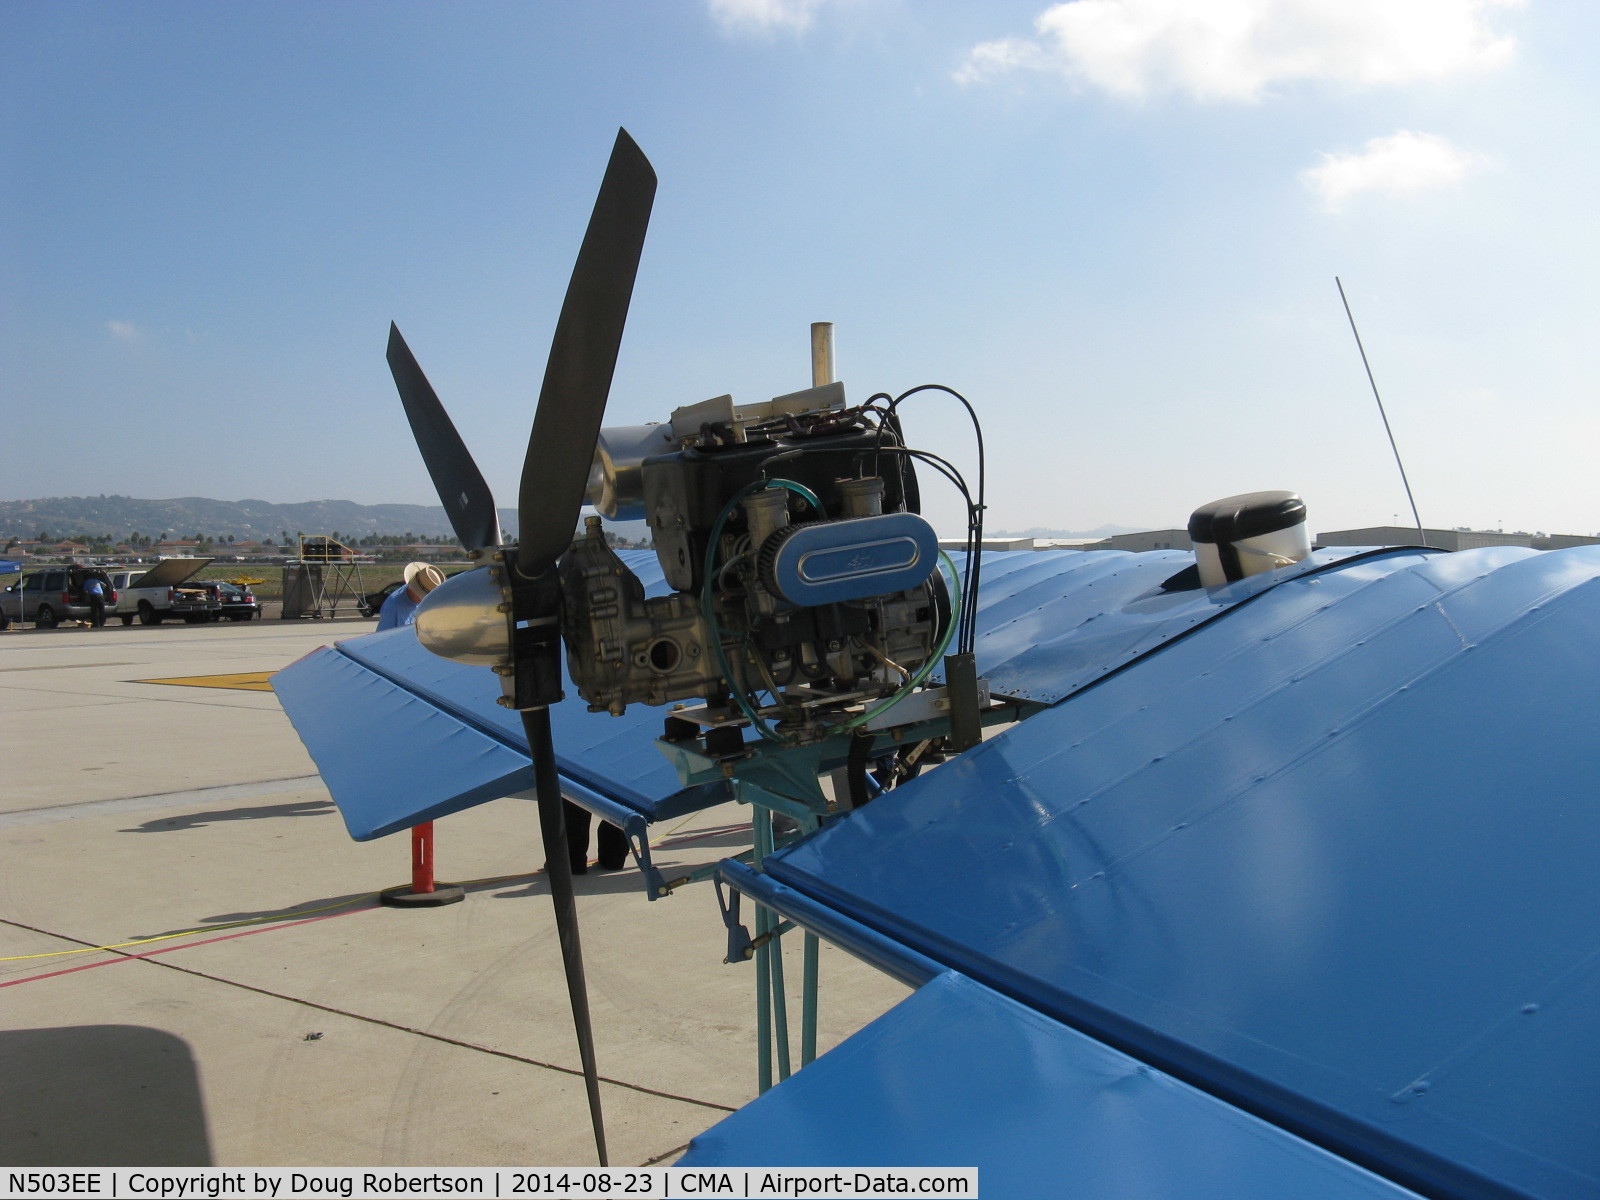 N503EE, Peterson Bill BLUE GOOSE C/N 001, Peterson BLUE GOOSE, probable Rotax 503 pusher